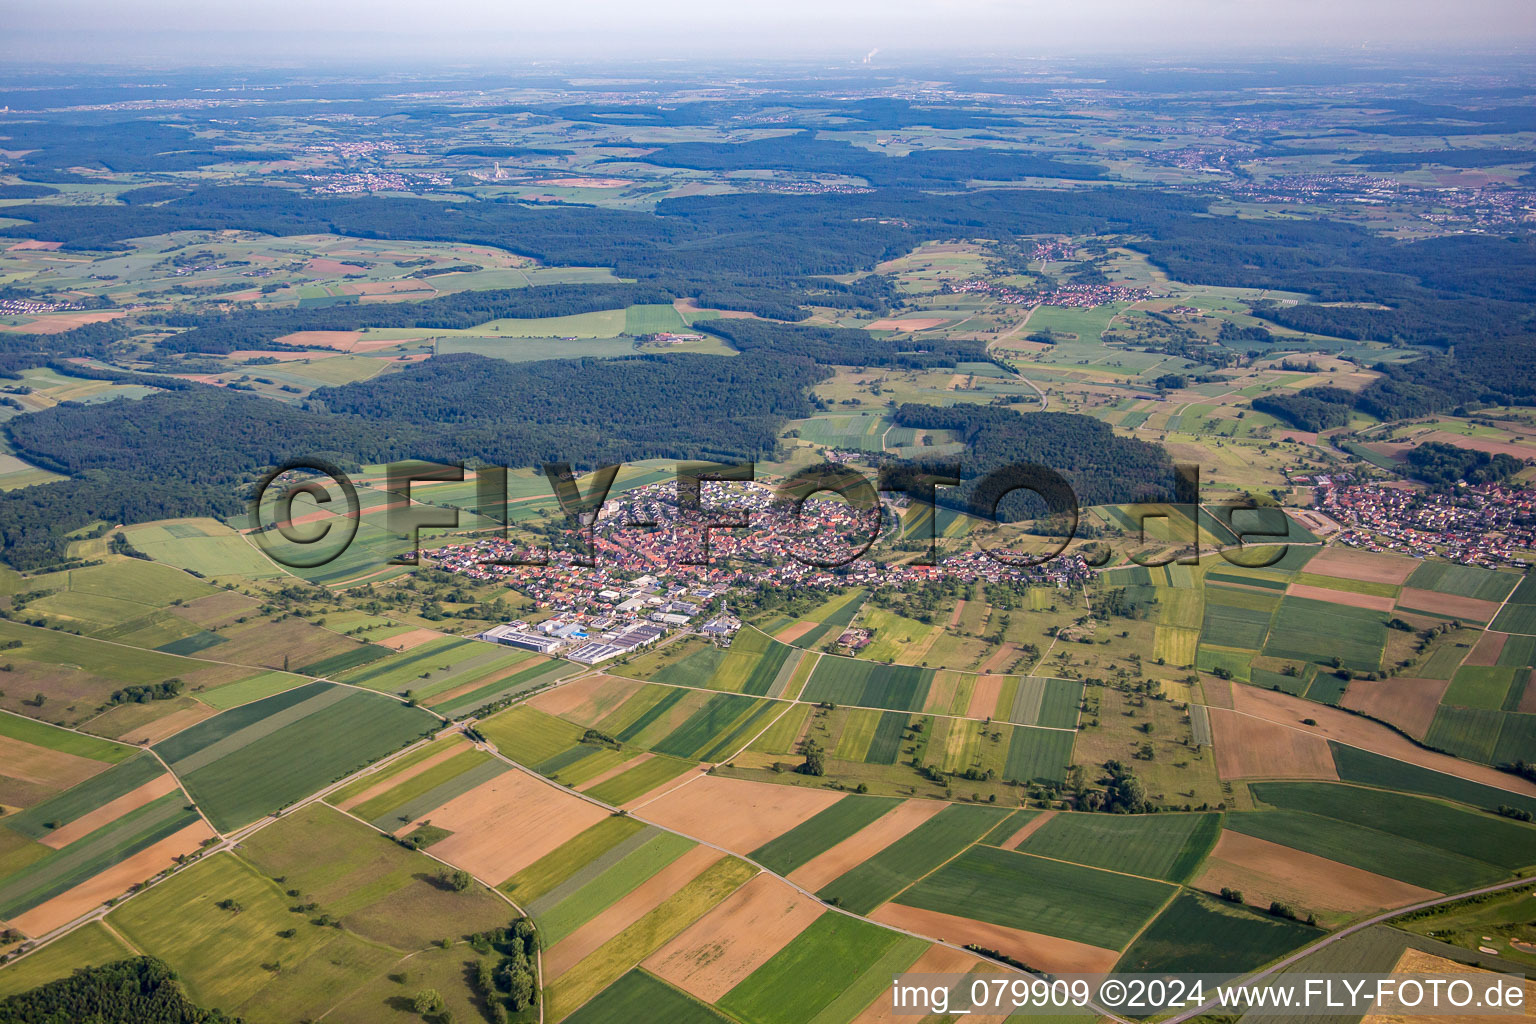 Aerial view of Village view in the district Goebrichen in Neulingen in the state Baden-Wurttemberg